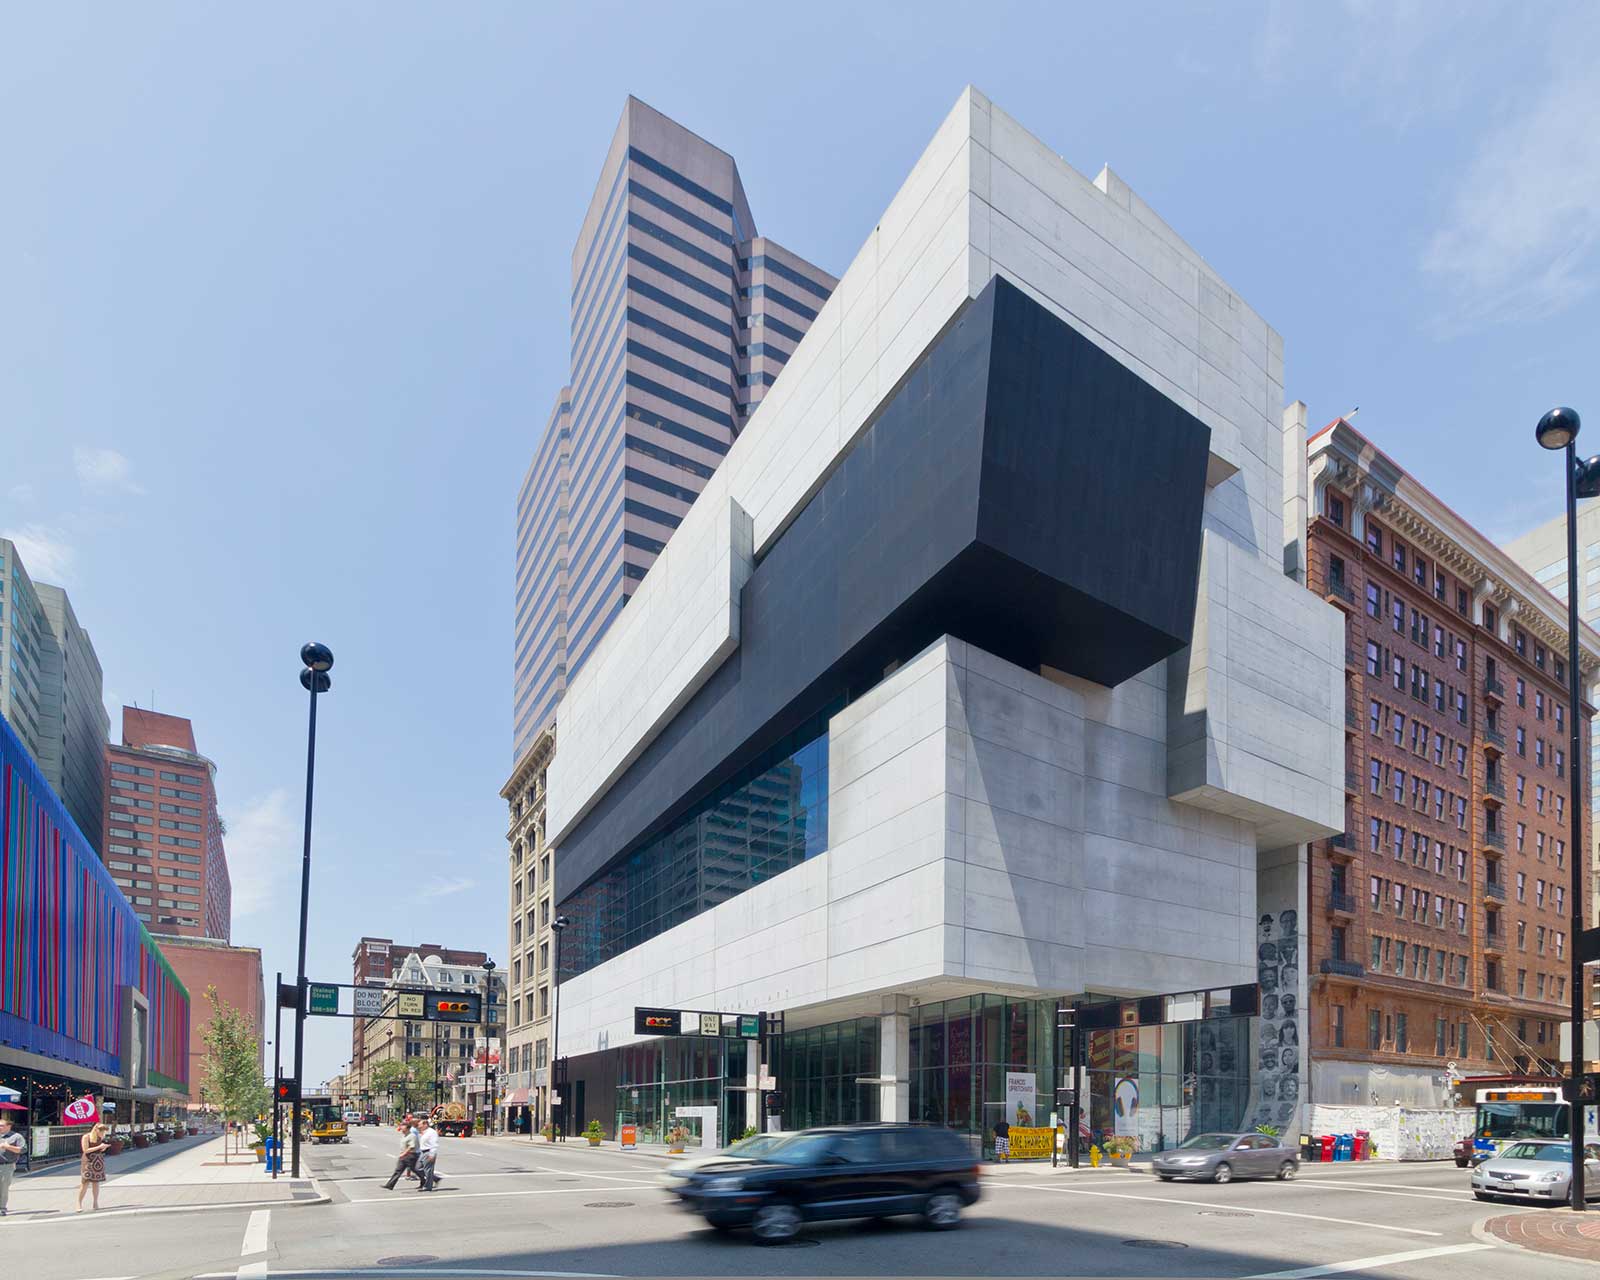 Southeast view of the Rosenthal Center for Contemporary Art.